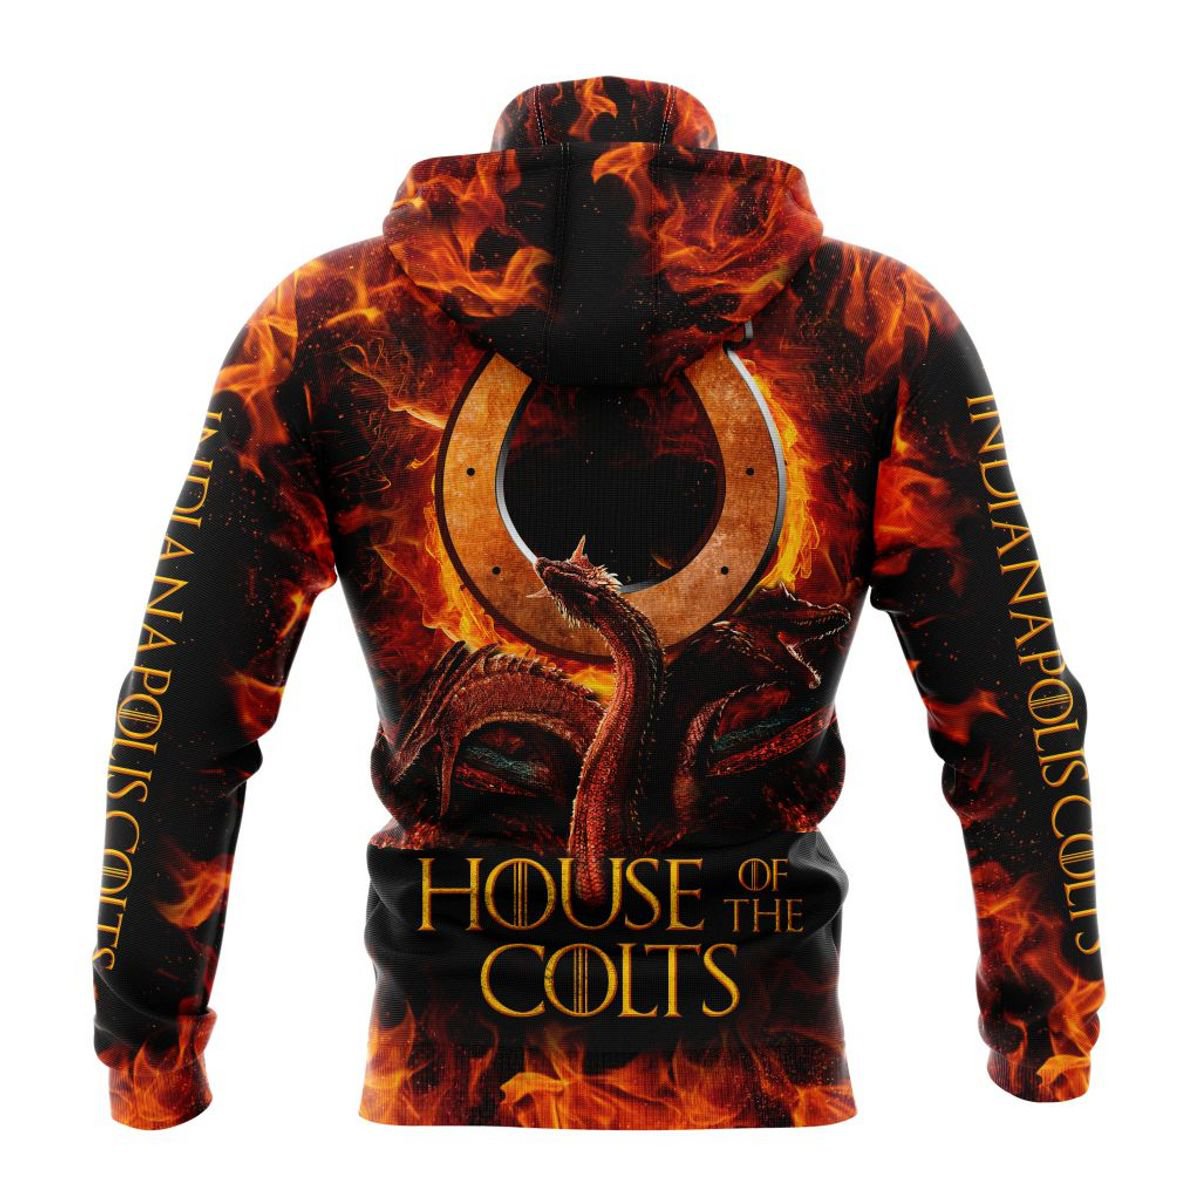 INDIANAPOLIS COLTS GAME OF THRONES – HOUSE OF THE COLTS 3D HOODIE